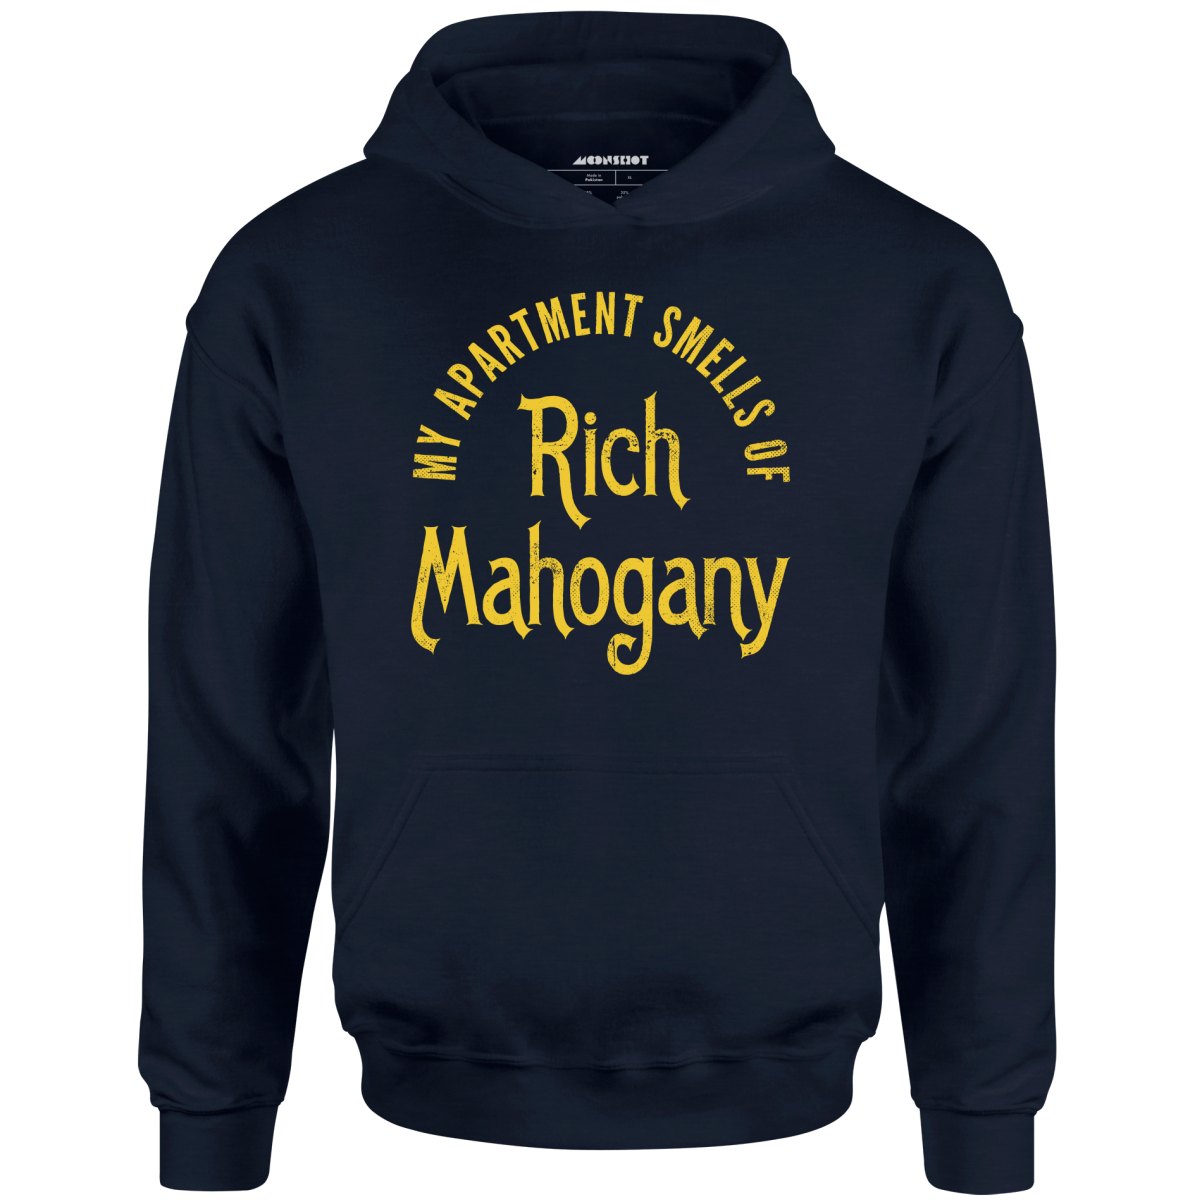 My Apartment Smells of Rich Mahogany - Unisex Hoodie